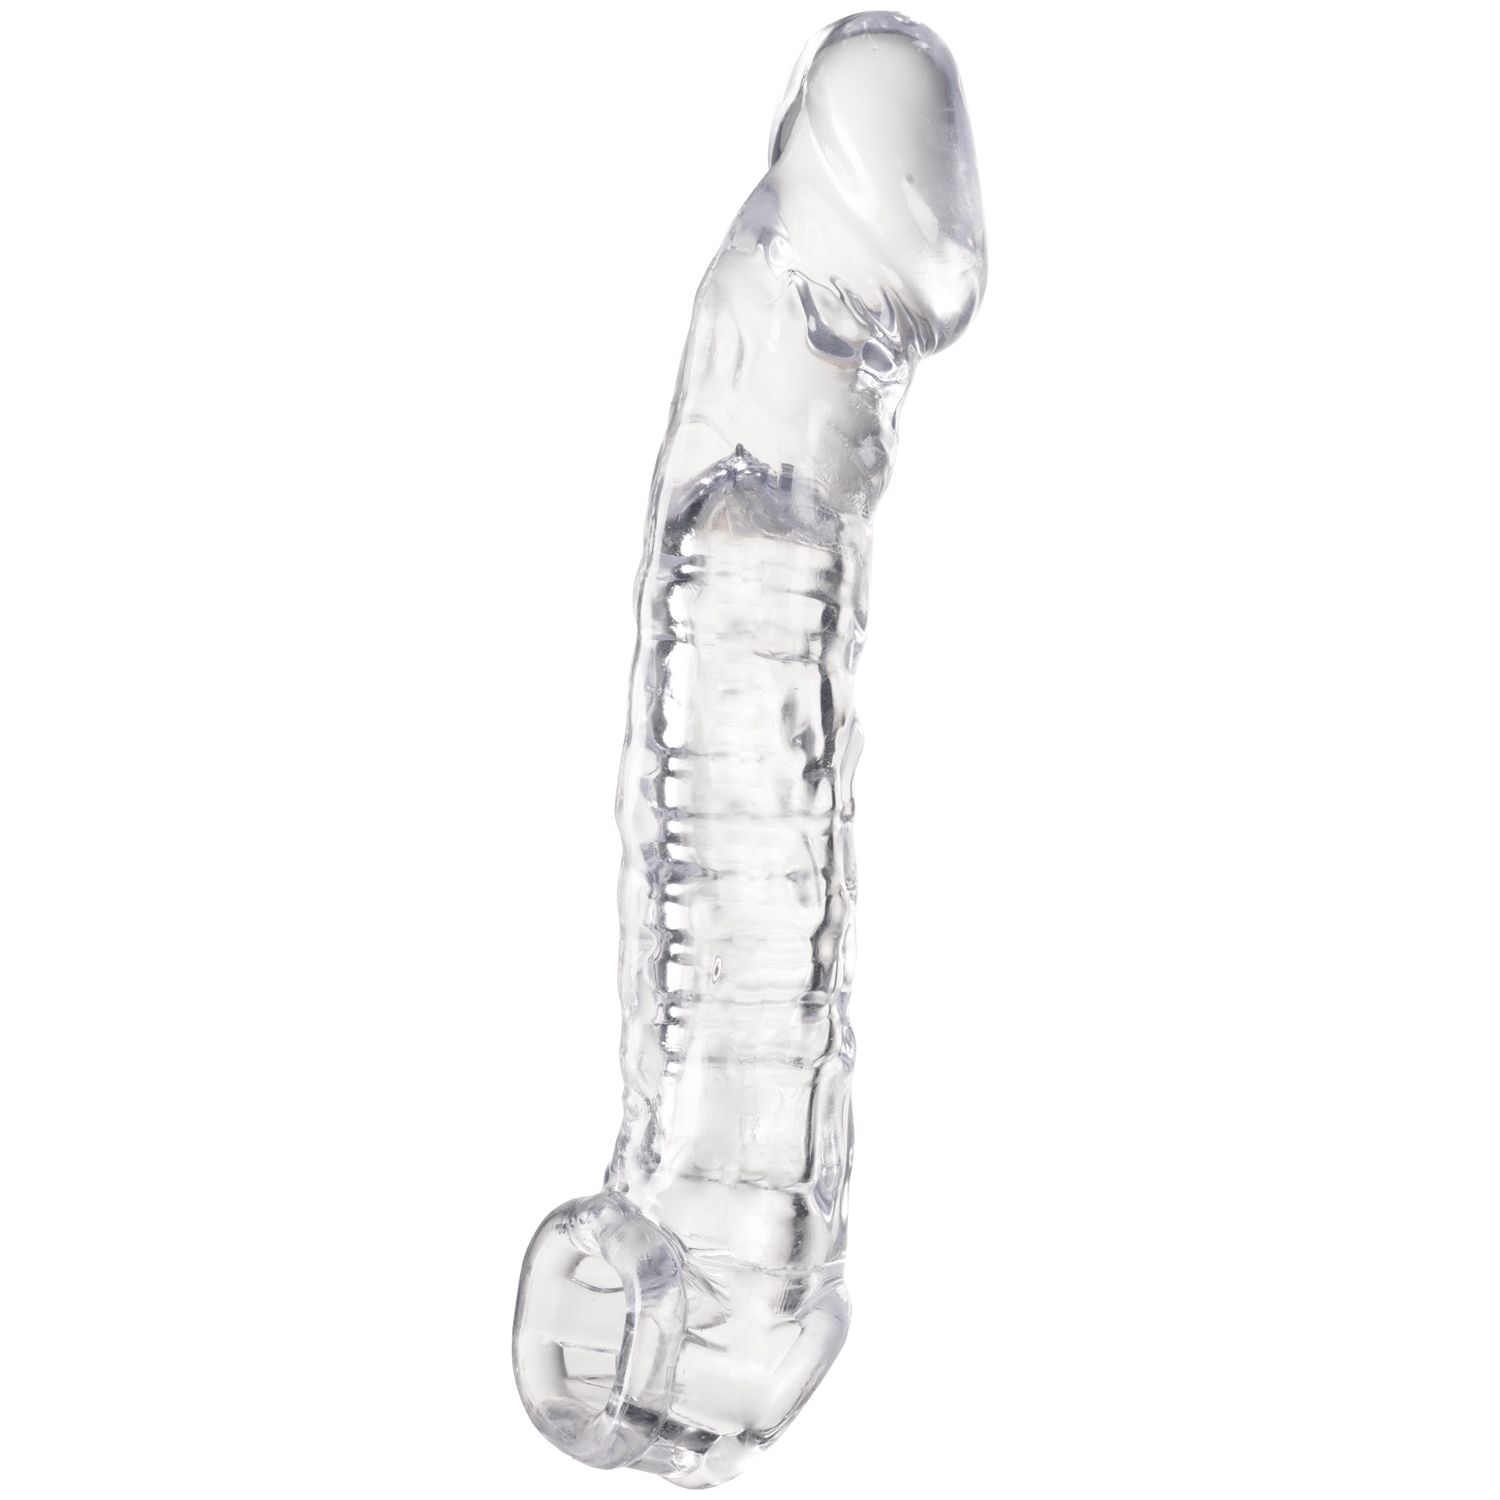 Oxballs Muscle Ripped Slim Cocksheath Penis Sleeve - Clear thumbnail